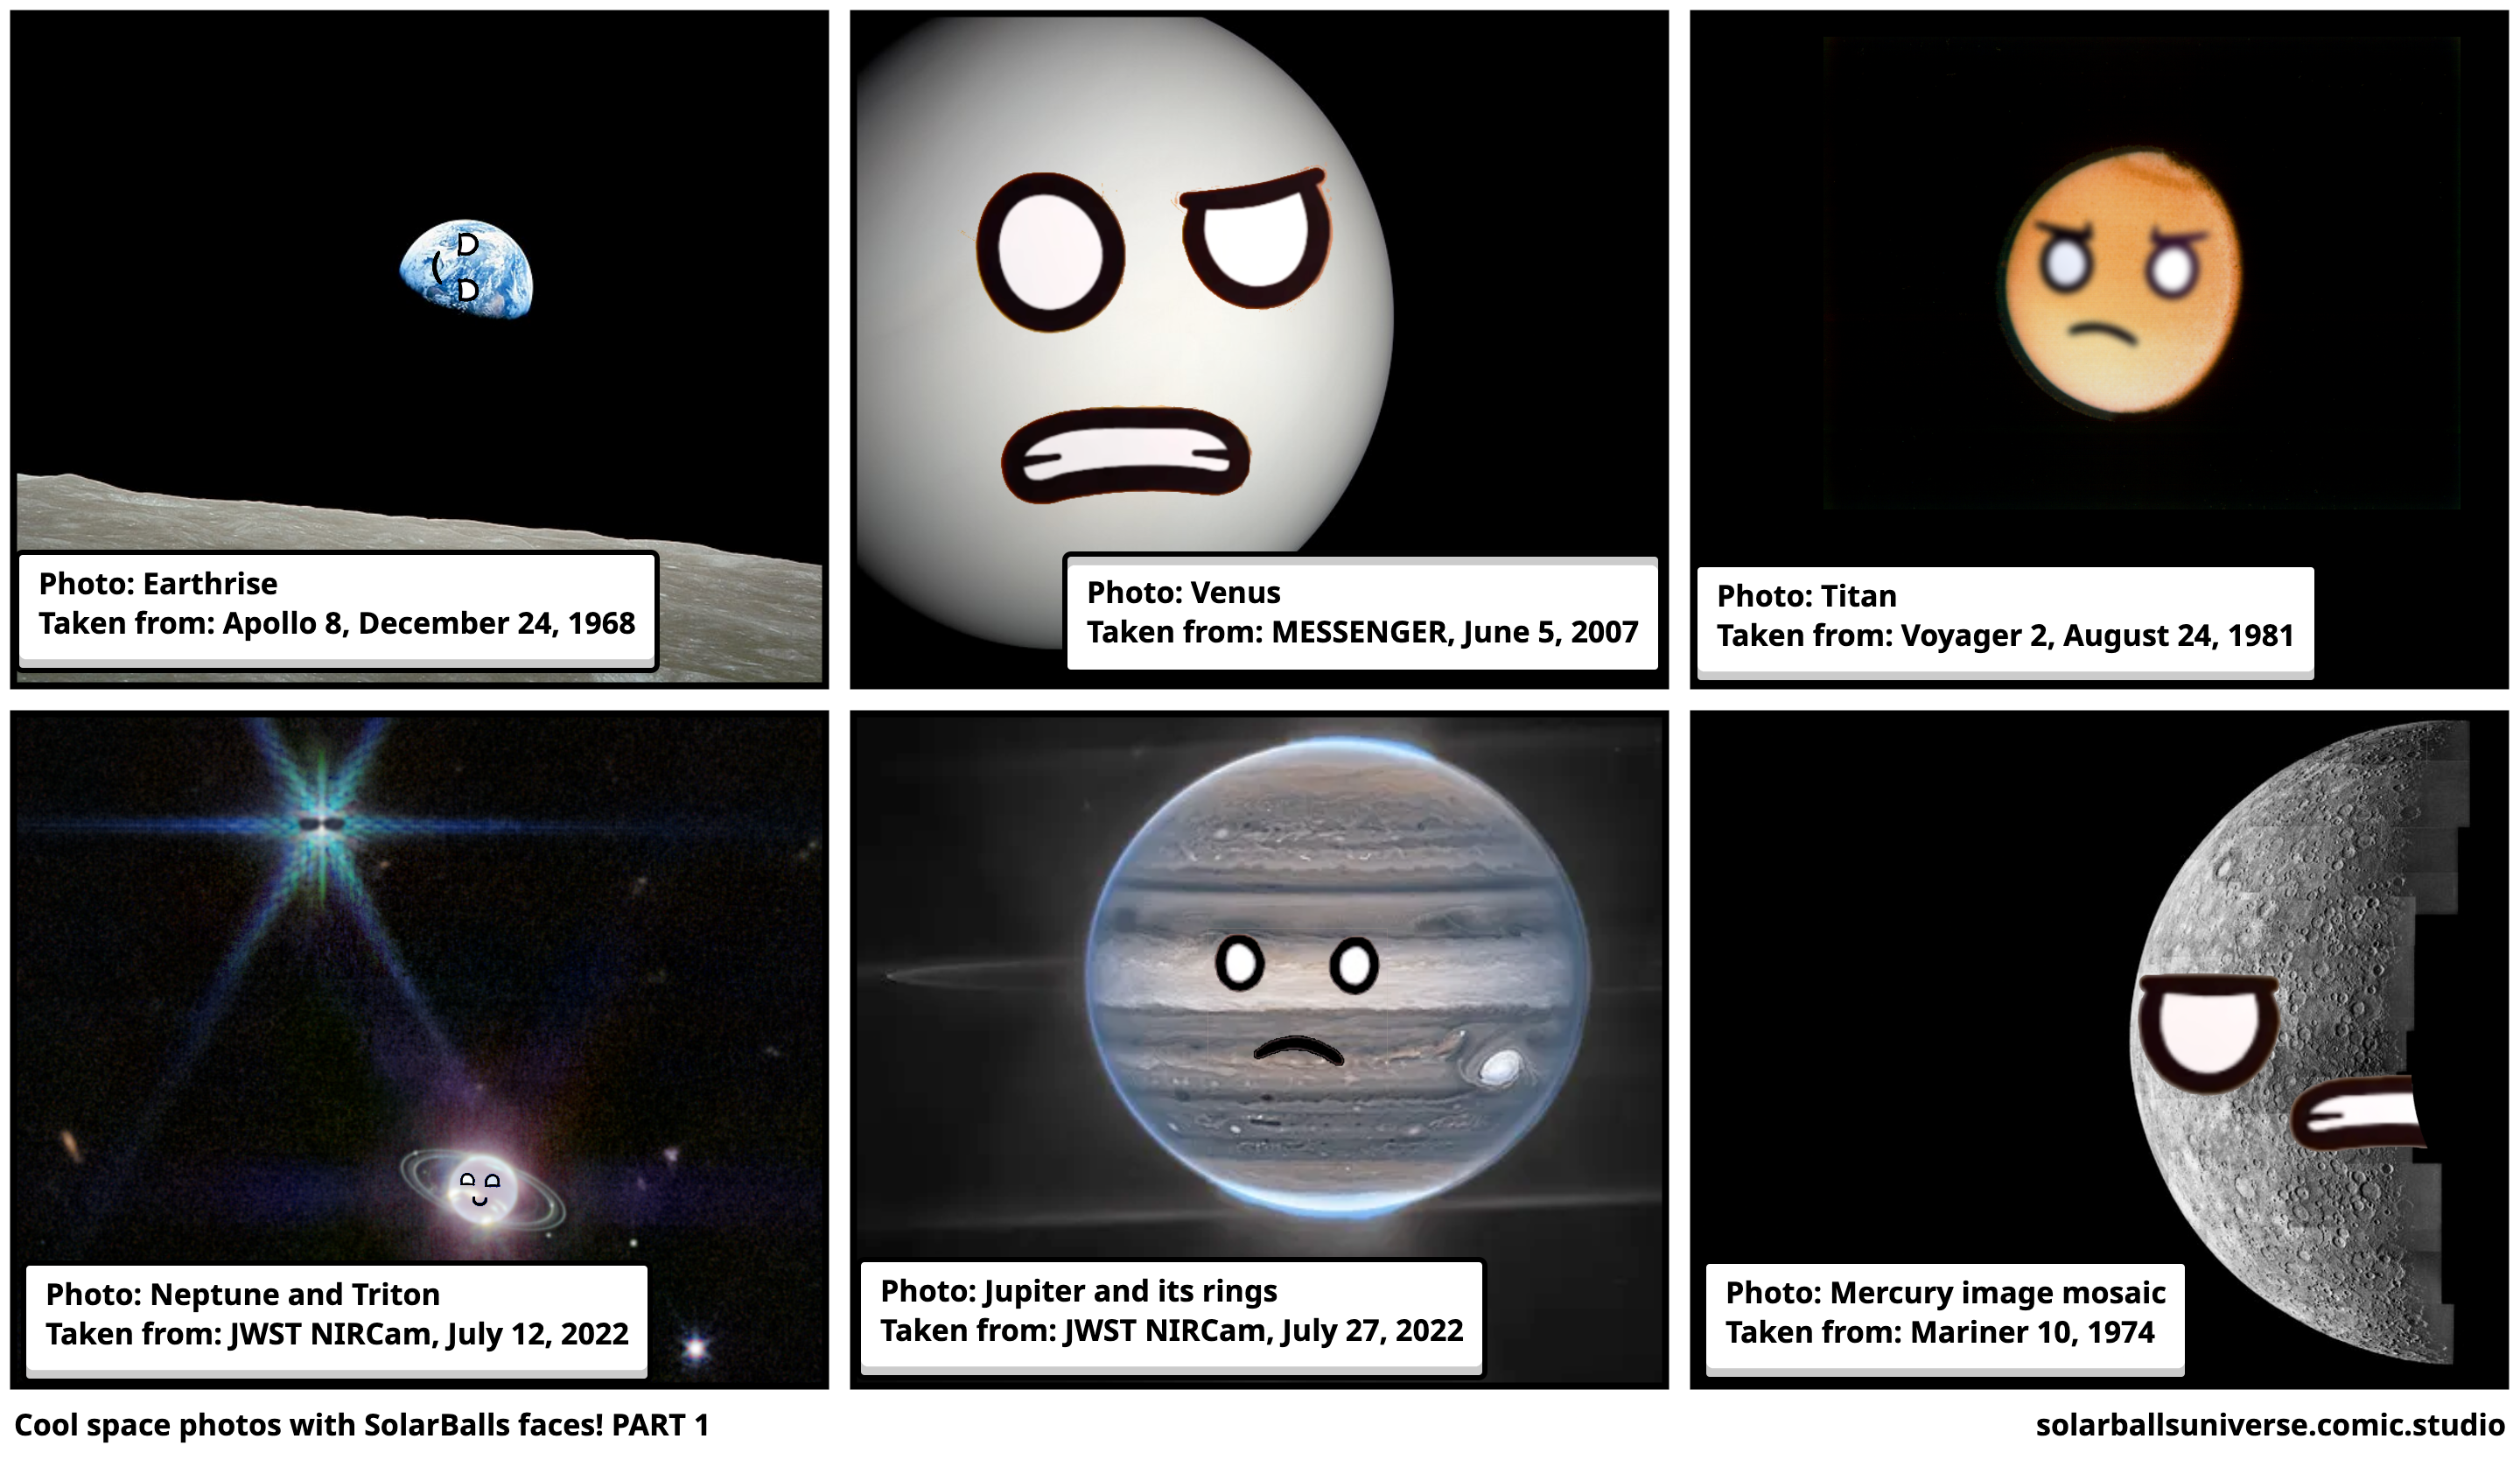 Cool space photos with SolarBalls faces! PART 1